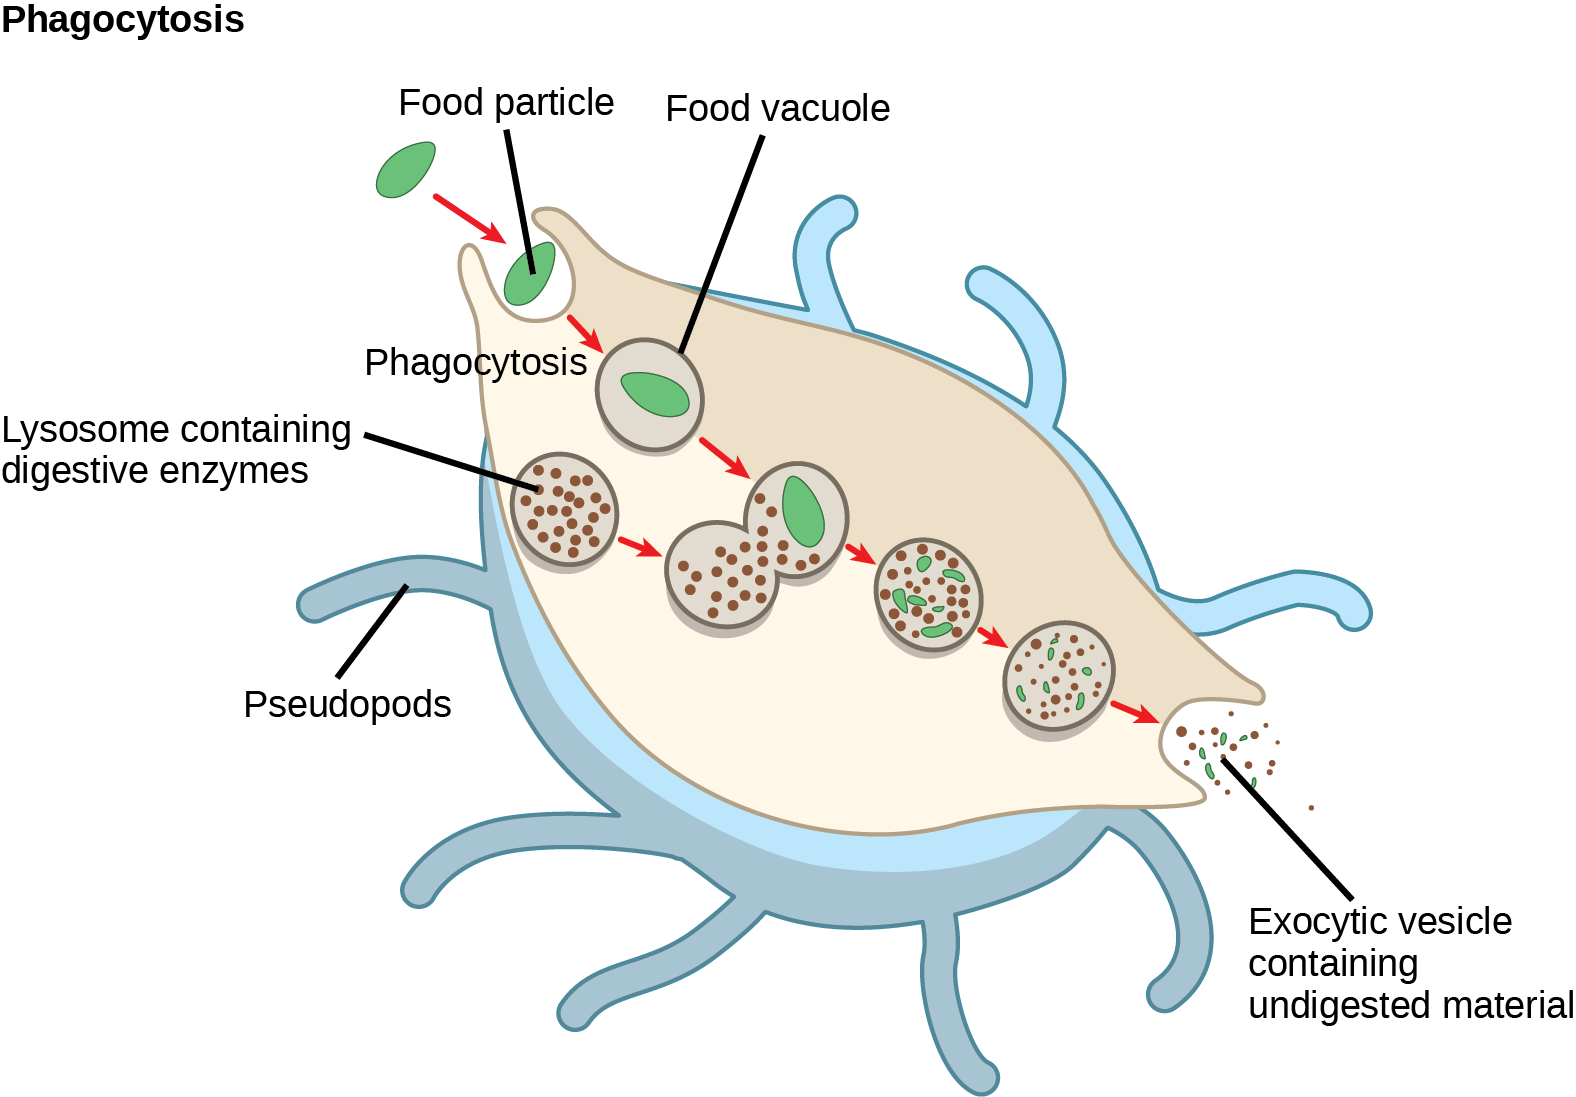 In this illustration, a eukaryotic cell is shown consuming a bacterium. As the bacterium is consumed, it is encapsulated in a vesicle. The vesicle fuses with a lysosome, and proteins inside the lysosome digest the bacterium.